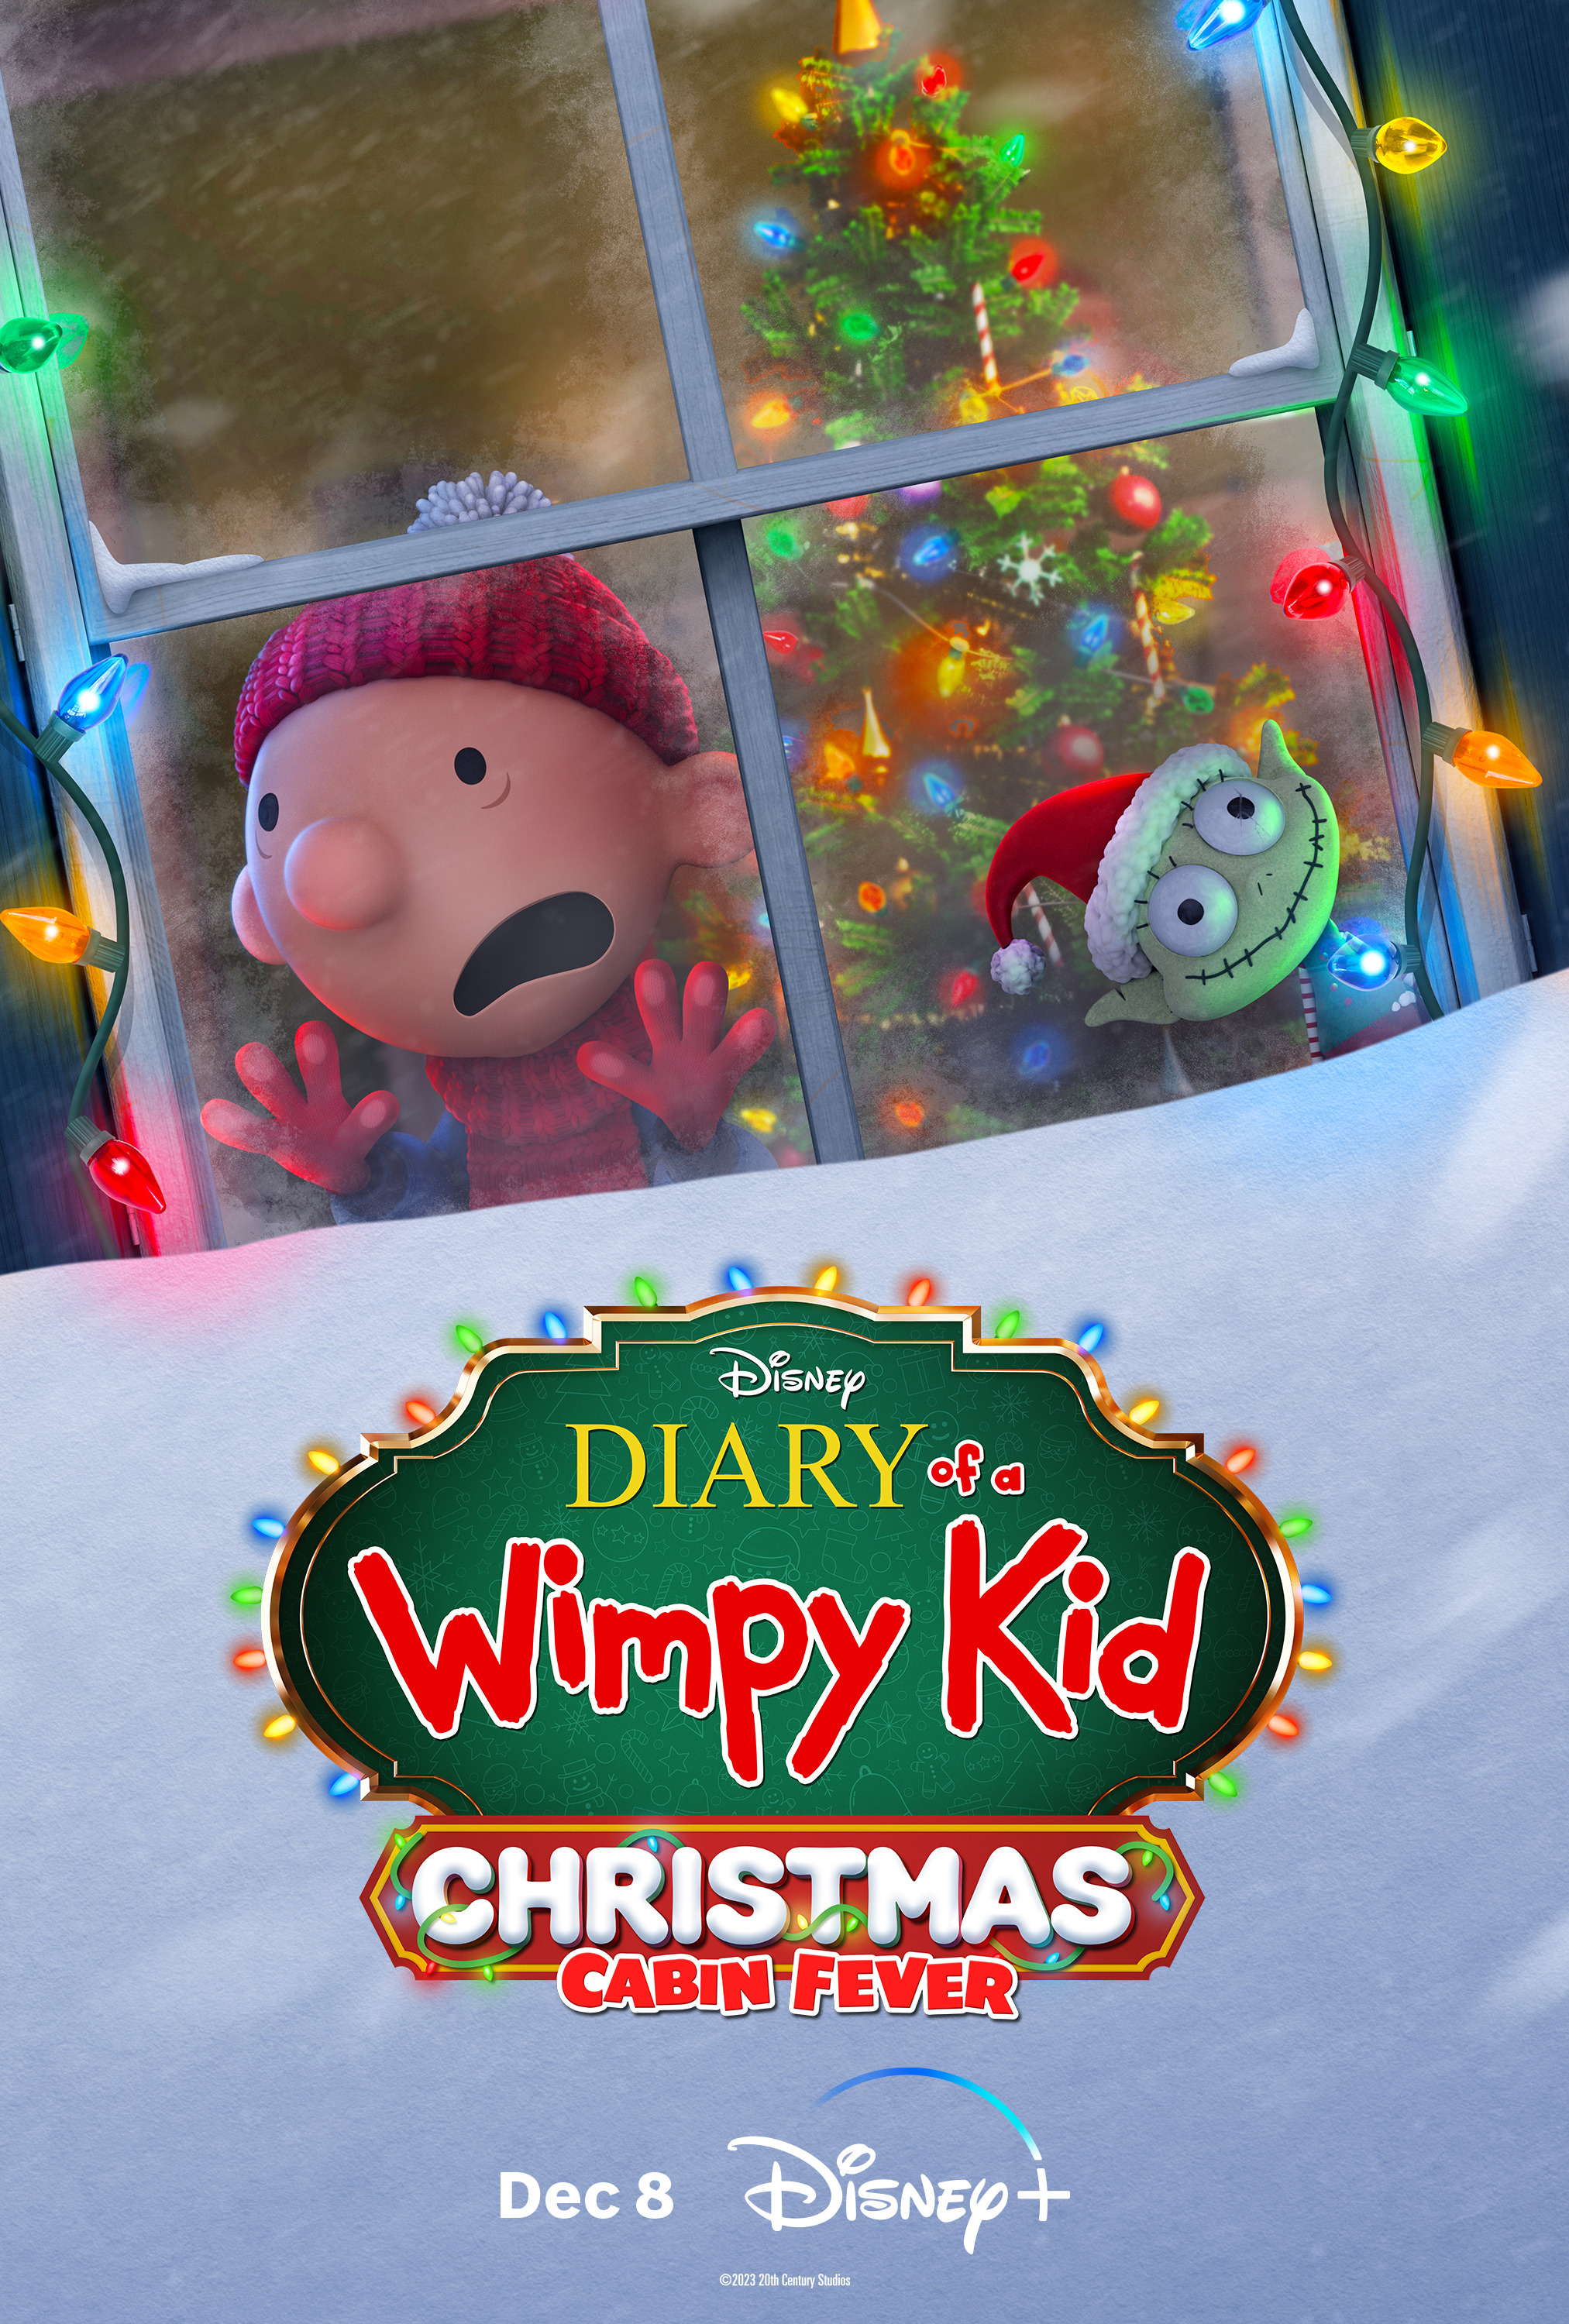 Mega Sized Movie Poster Image for Diary of a Wimpy Kid Christmas: Cabin Fever (#2 of 4)